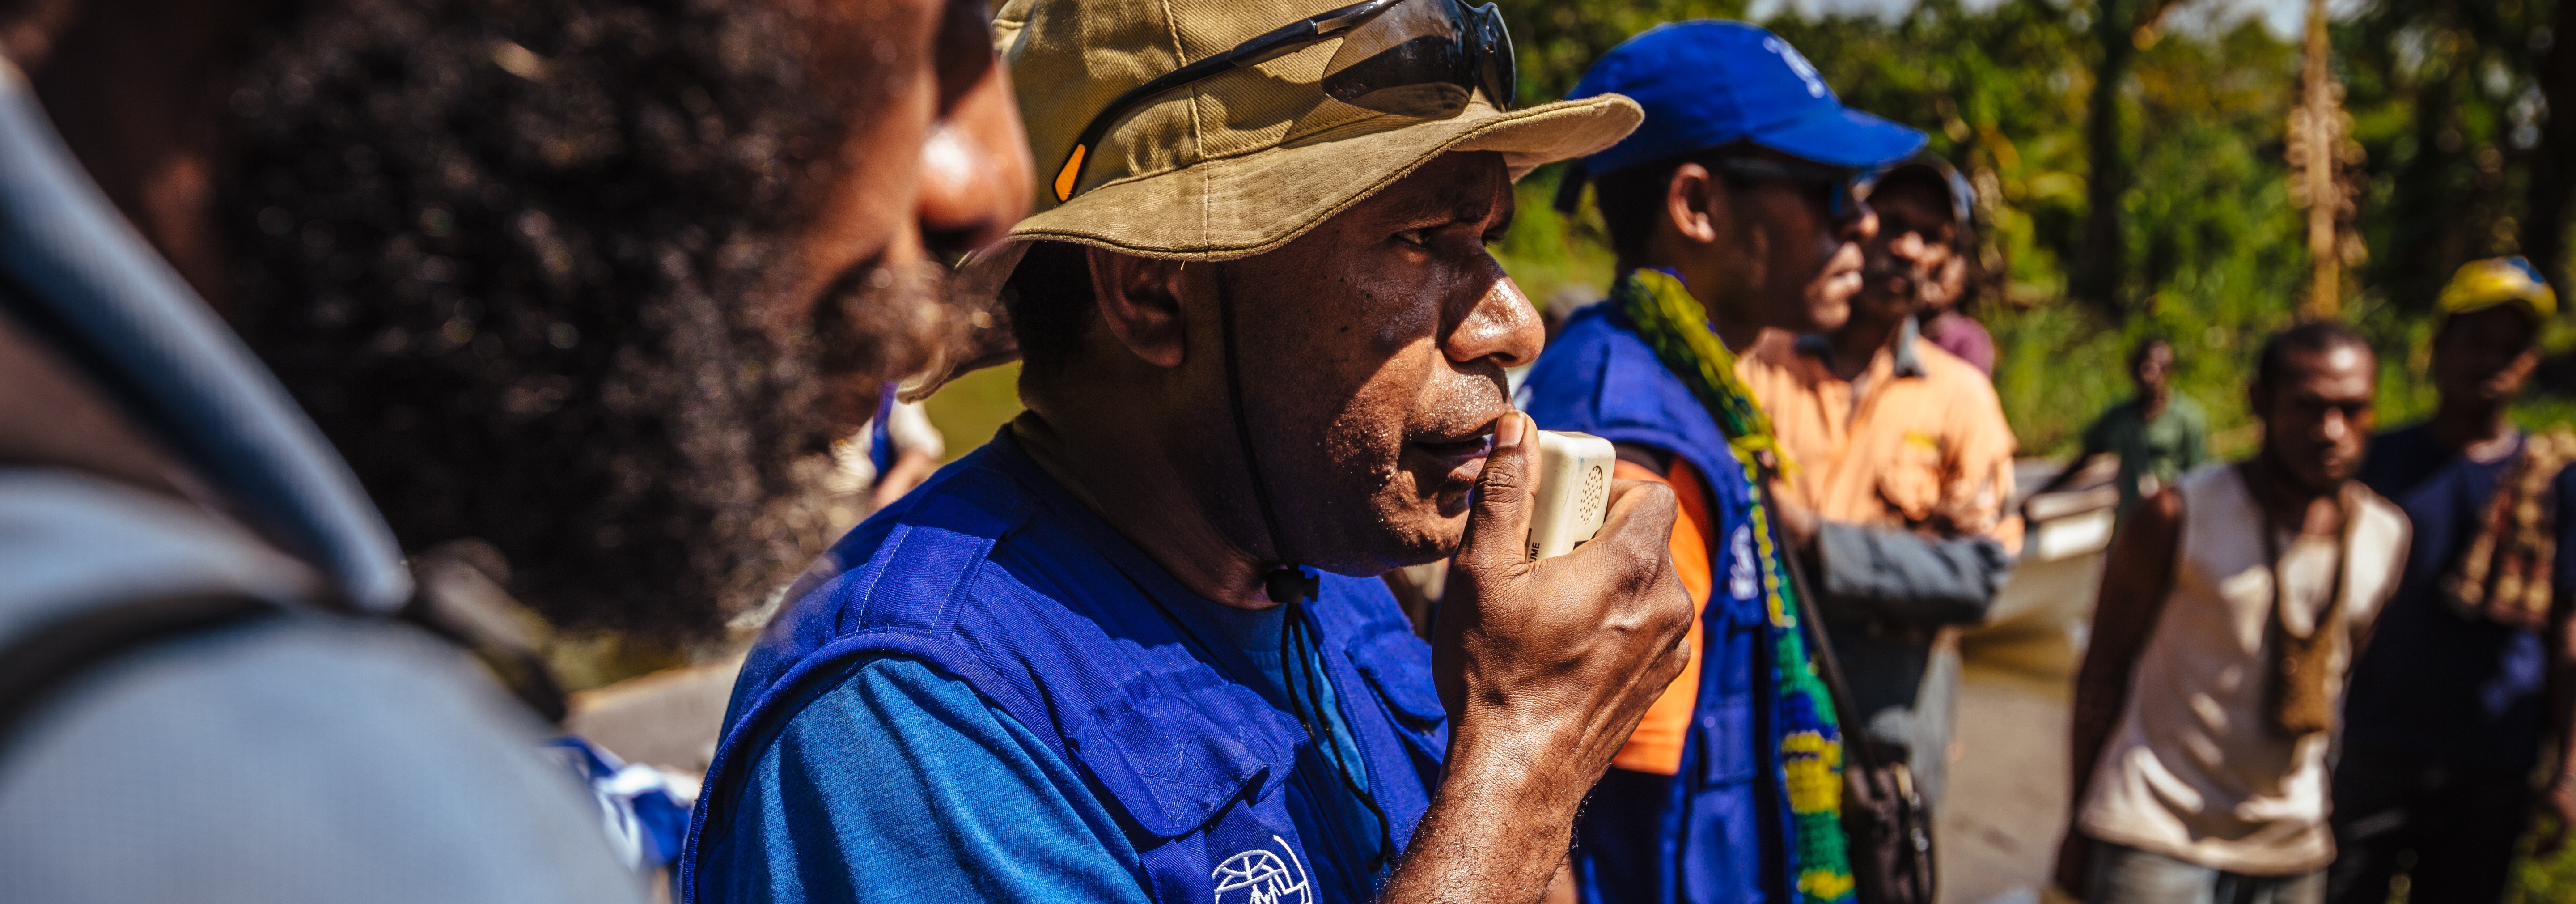 IOM addressing displaced communities during flood response in Oro, Papua New Guinea - Photo Muse © IOMMohammad 